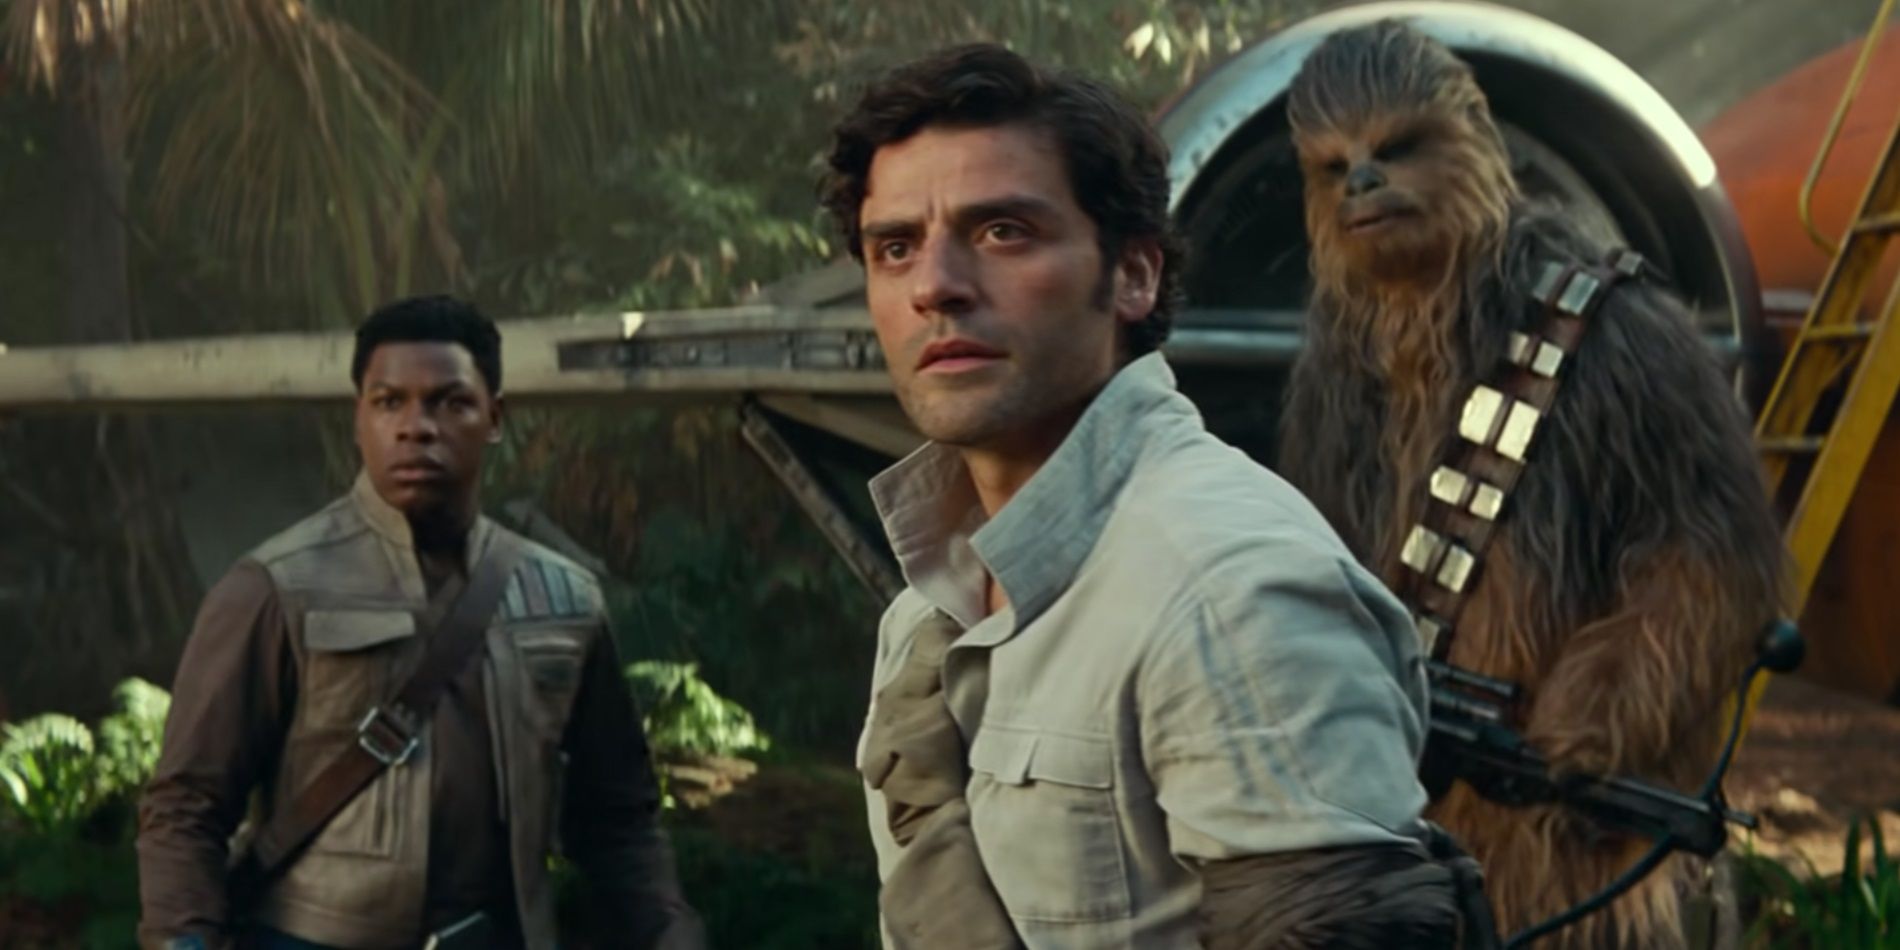 Poe, Finn, and Chewie in The Rise of Skywalker